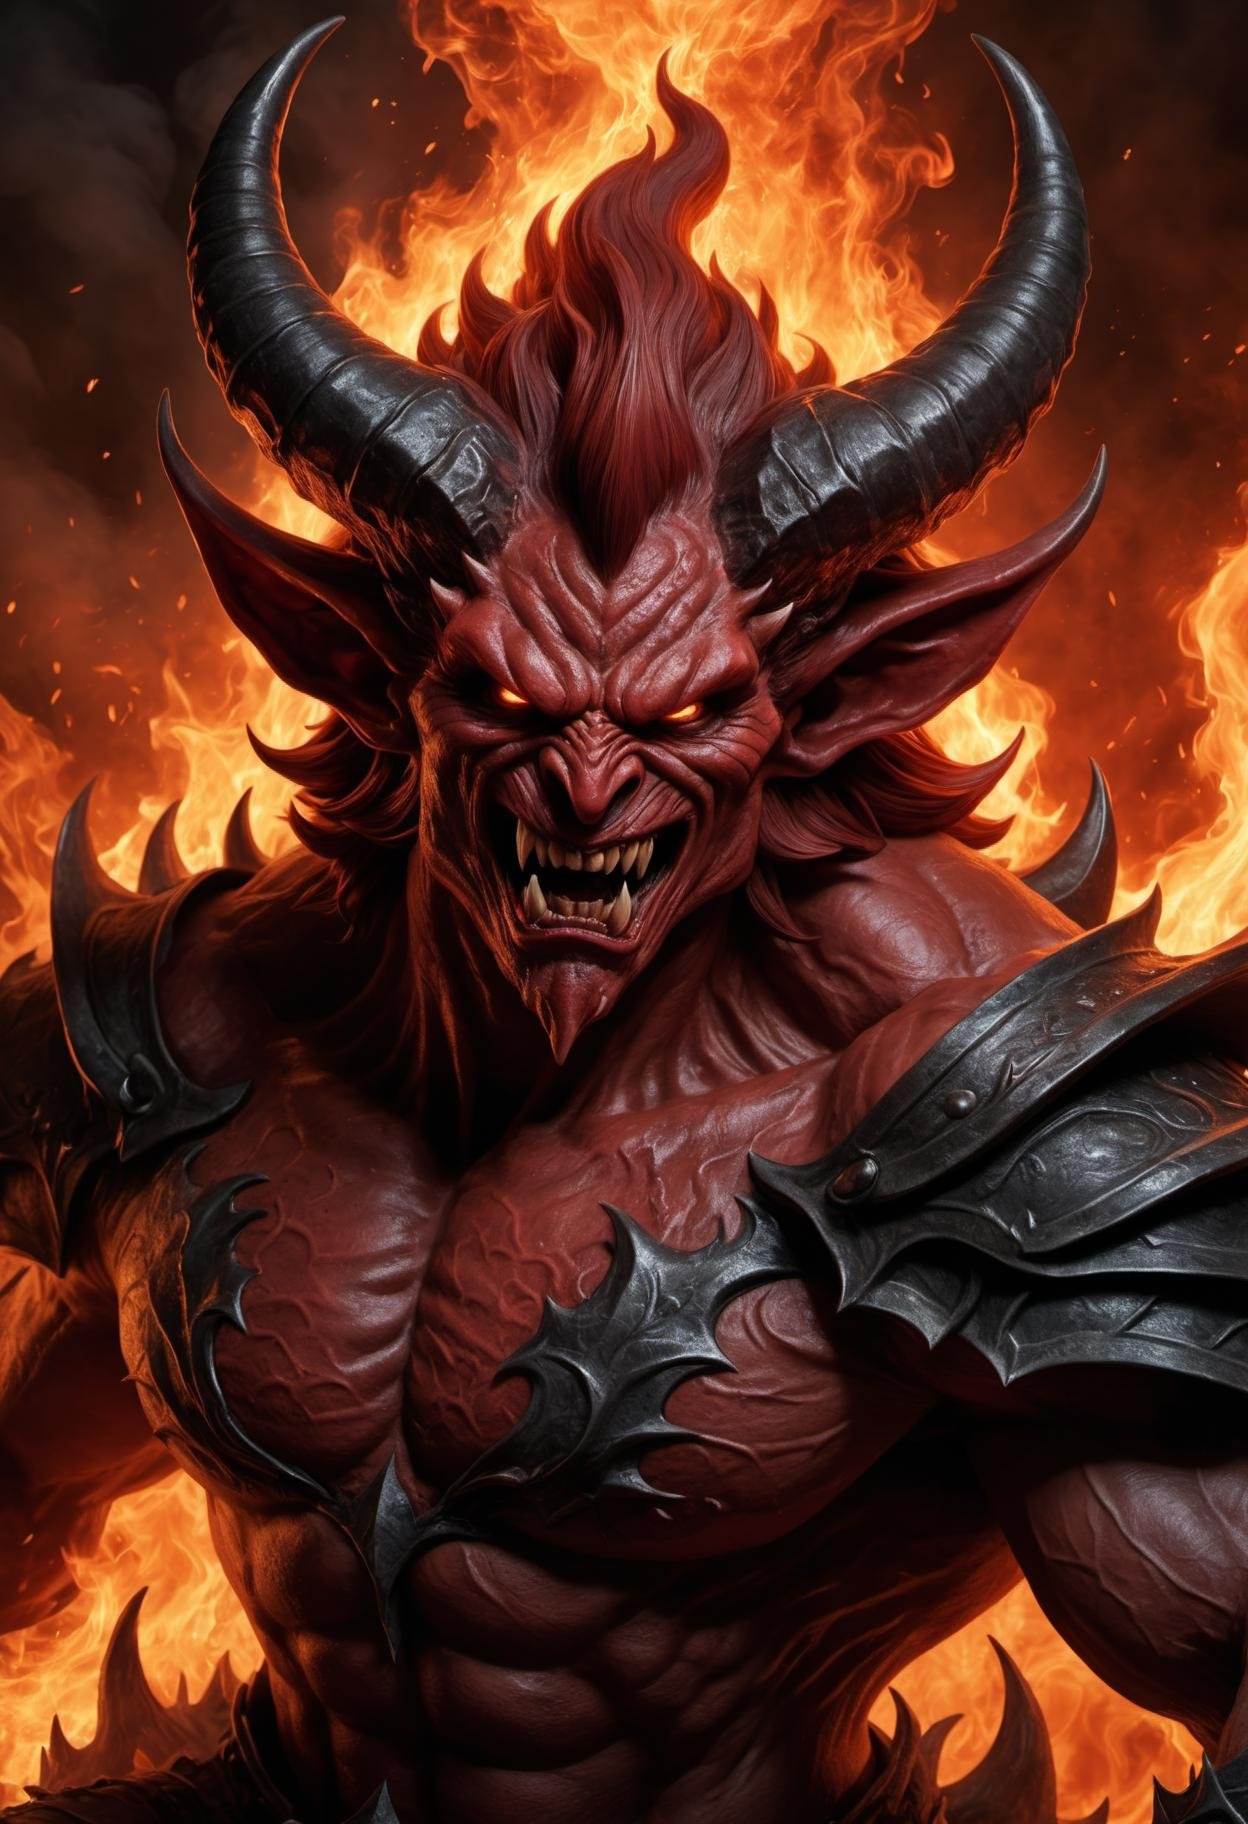 Comic style, realistic shading, airbrushed, soft edges,, a horrifying red-skinned male demon king, (body portrait:1.3), (detailed monstrous evil face:1.4), screaming, (detailed scaly skin texture:1.2), long curved horns, (in hell, swirling tormented souls, billowing smoke:1.5), black spiky armor